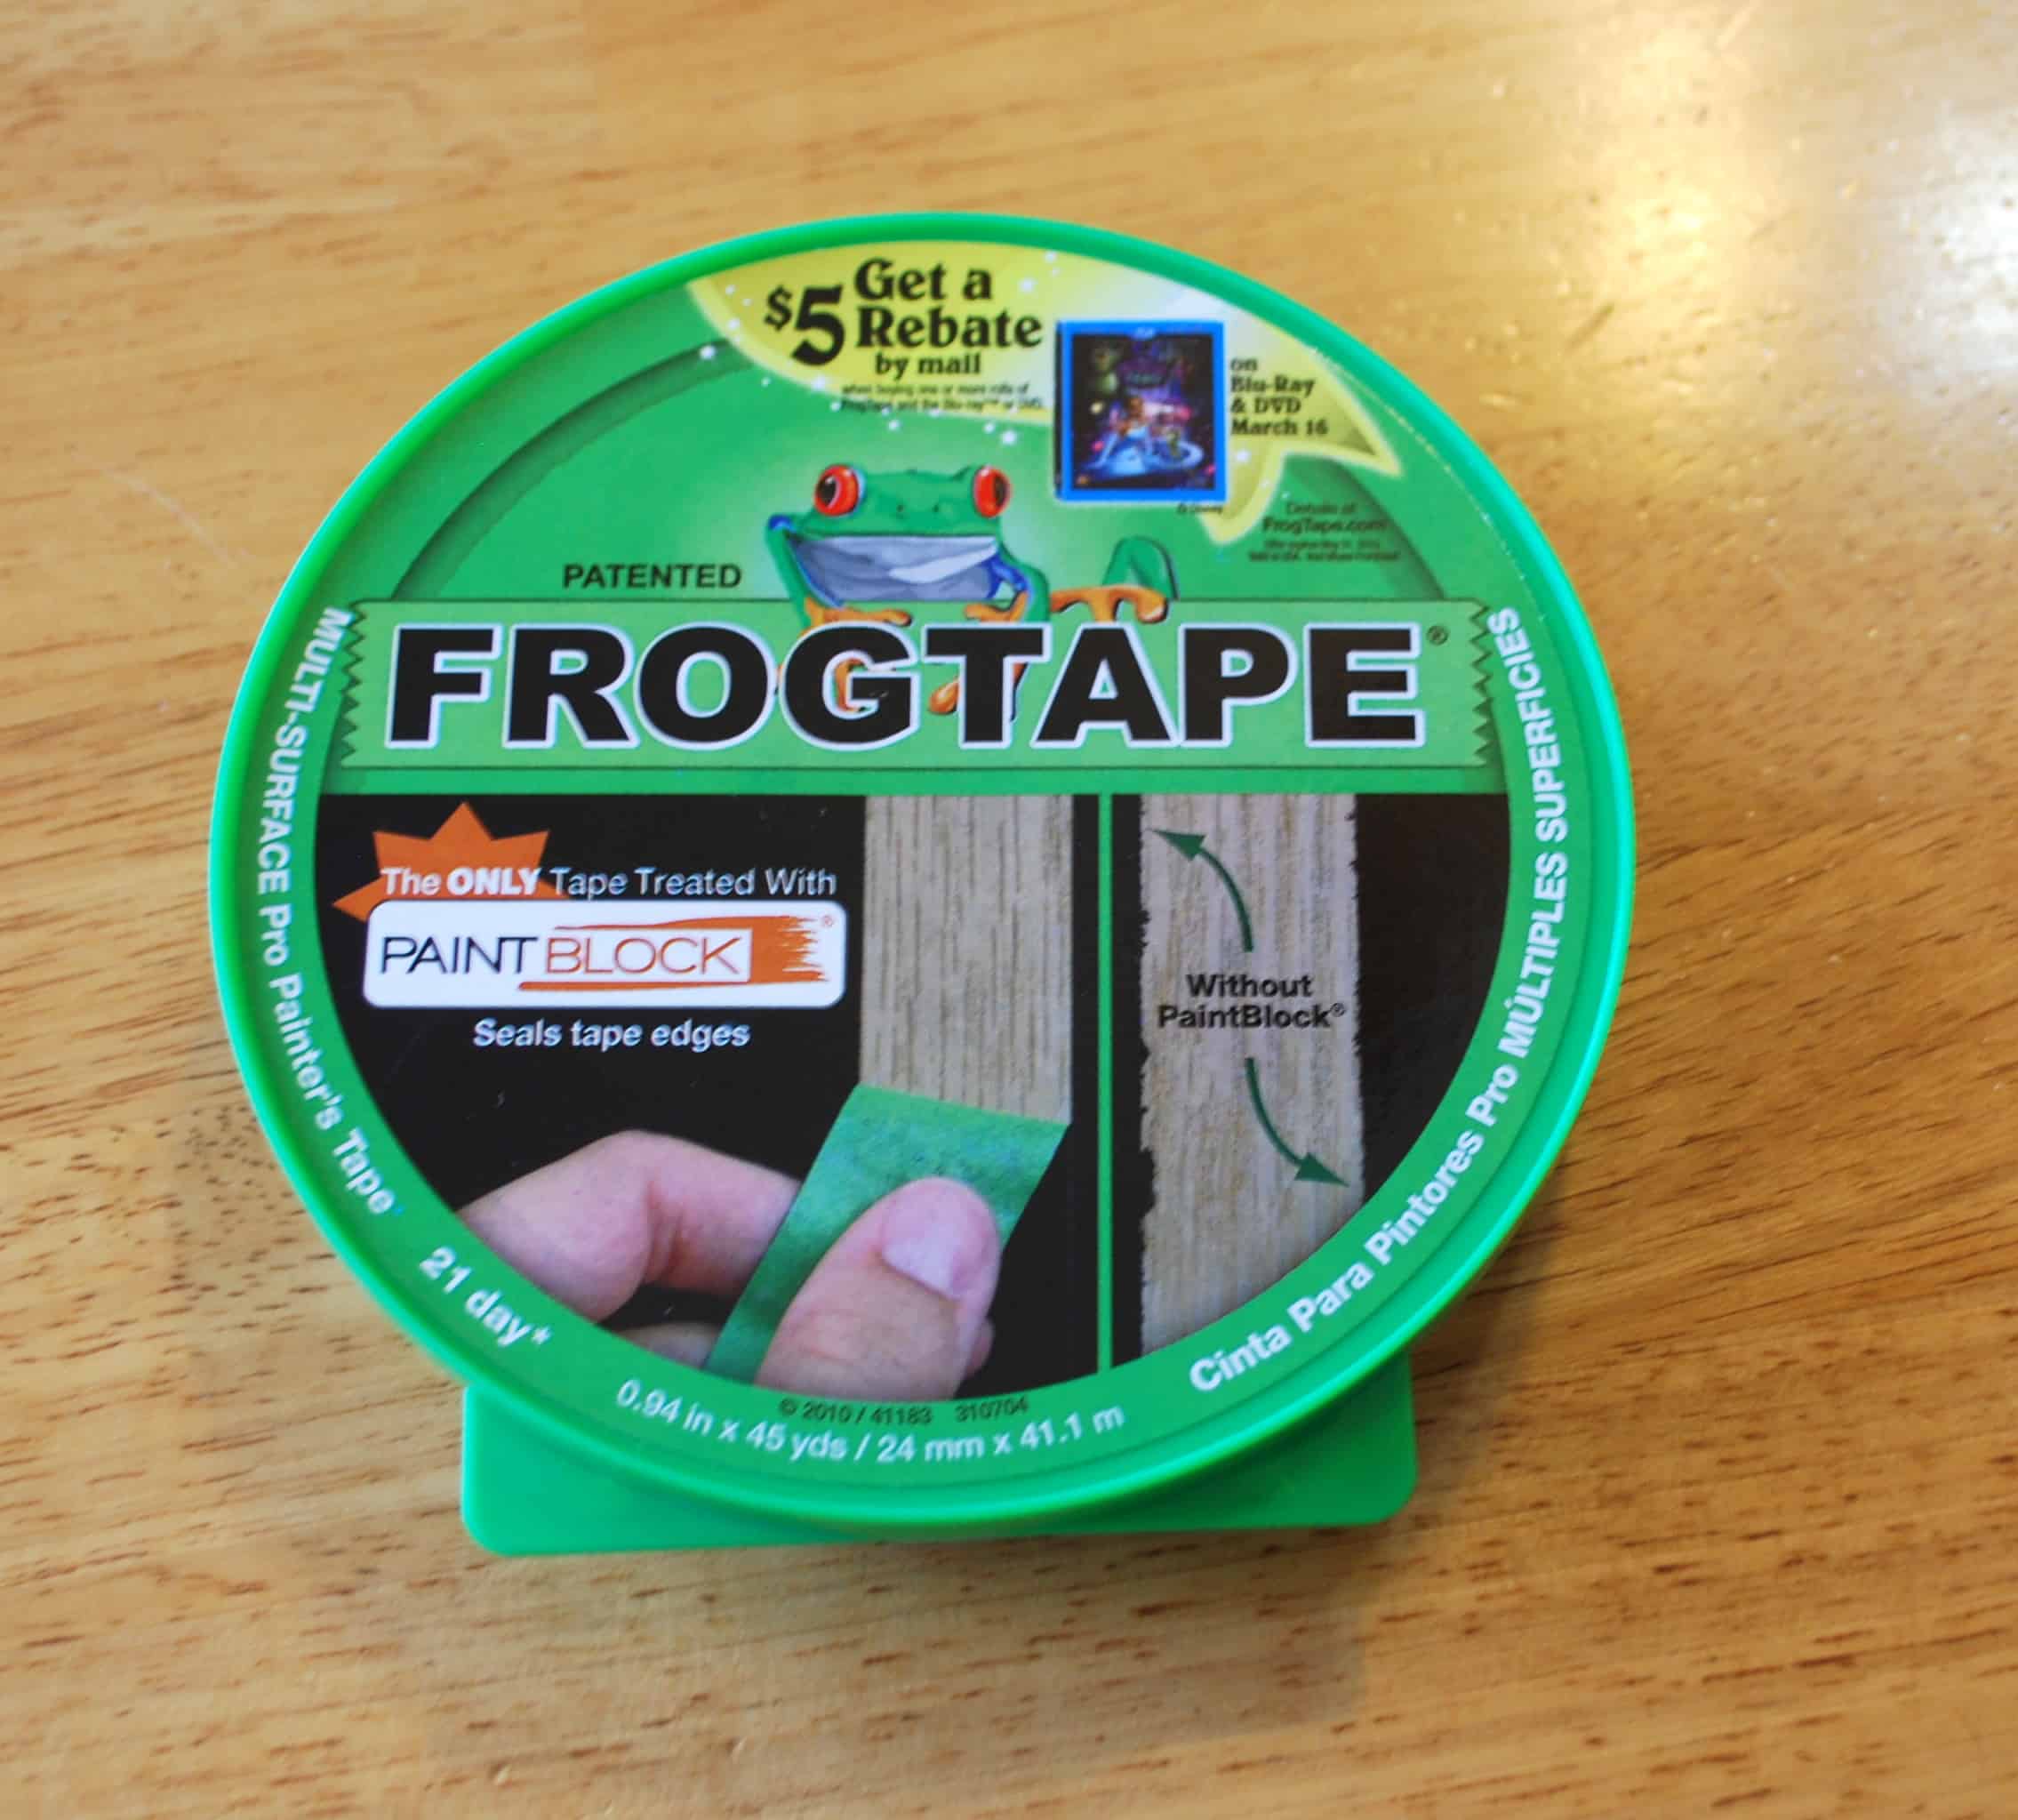 Frog tape review